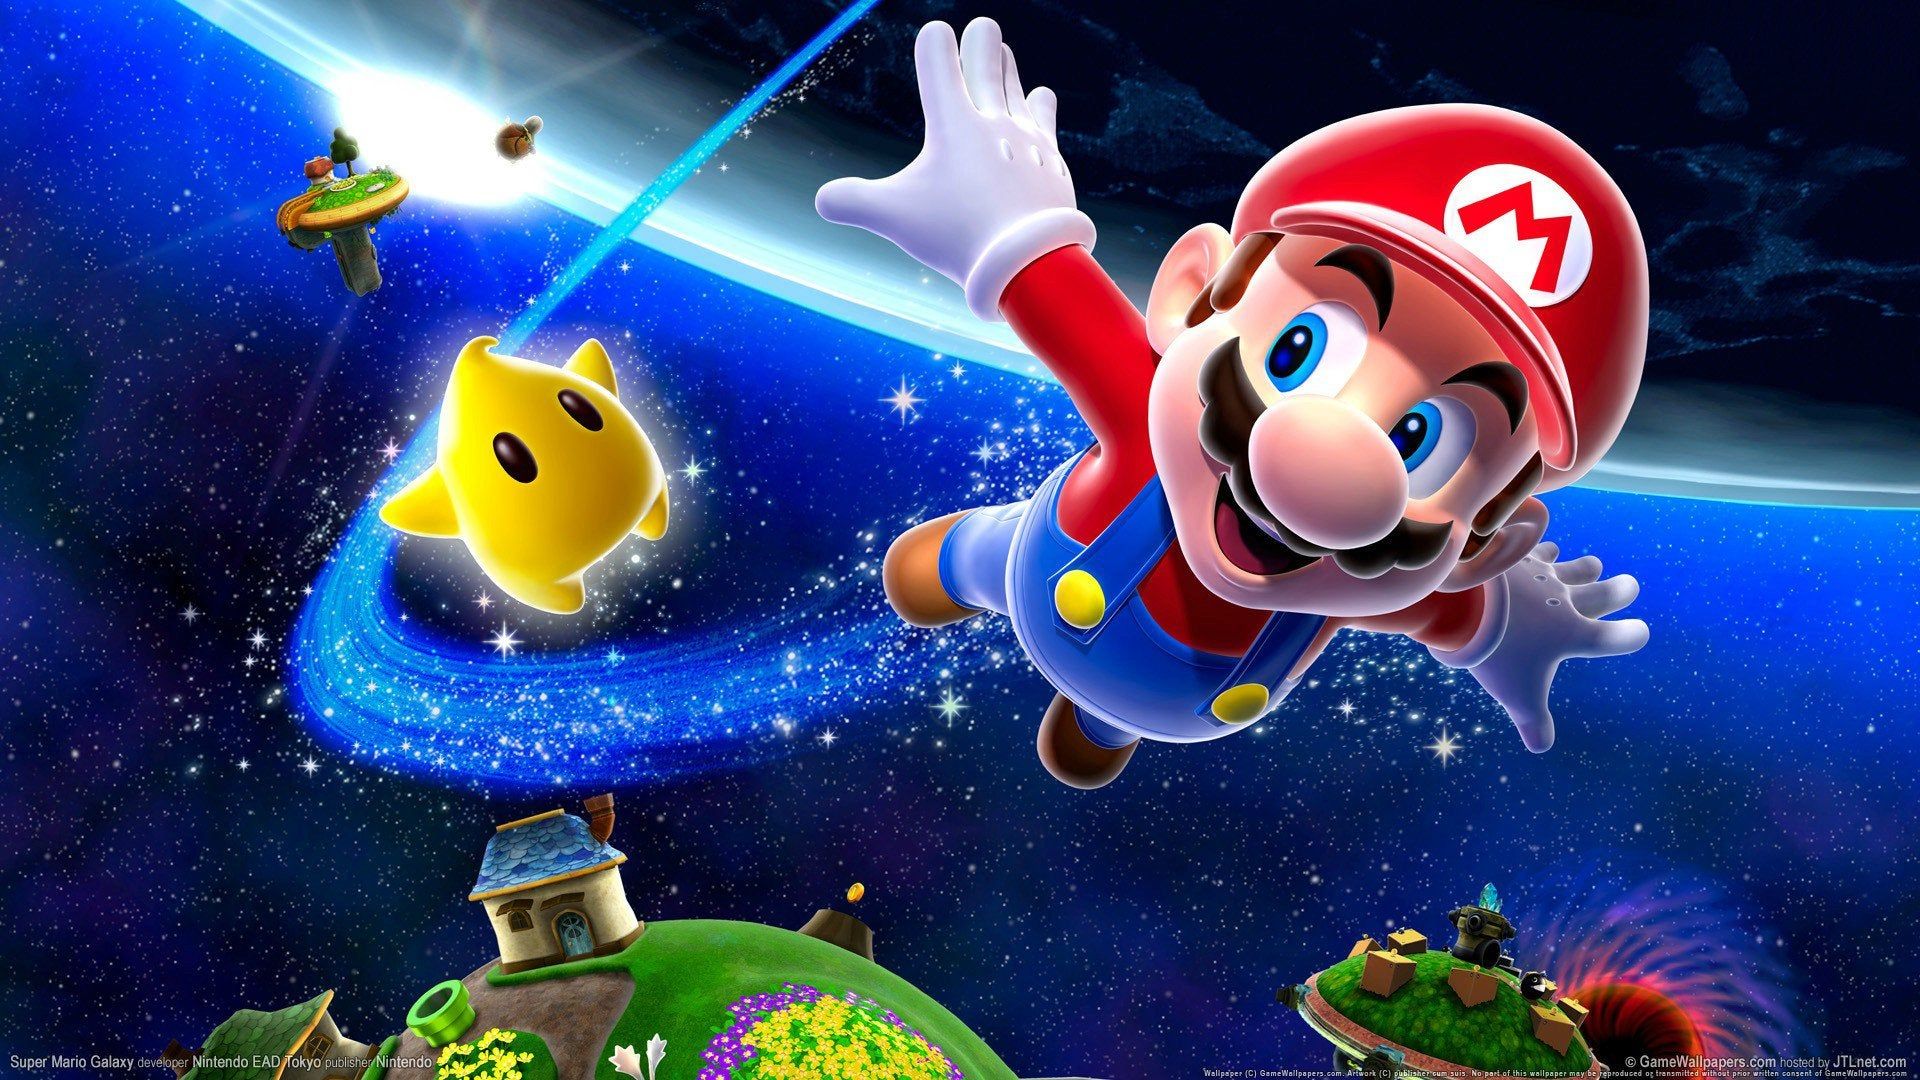 A wallpaper of mario flying in space - Gaming